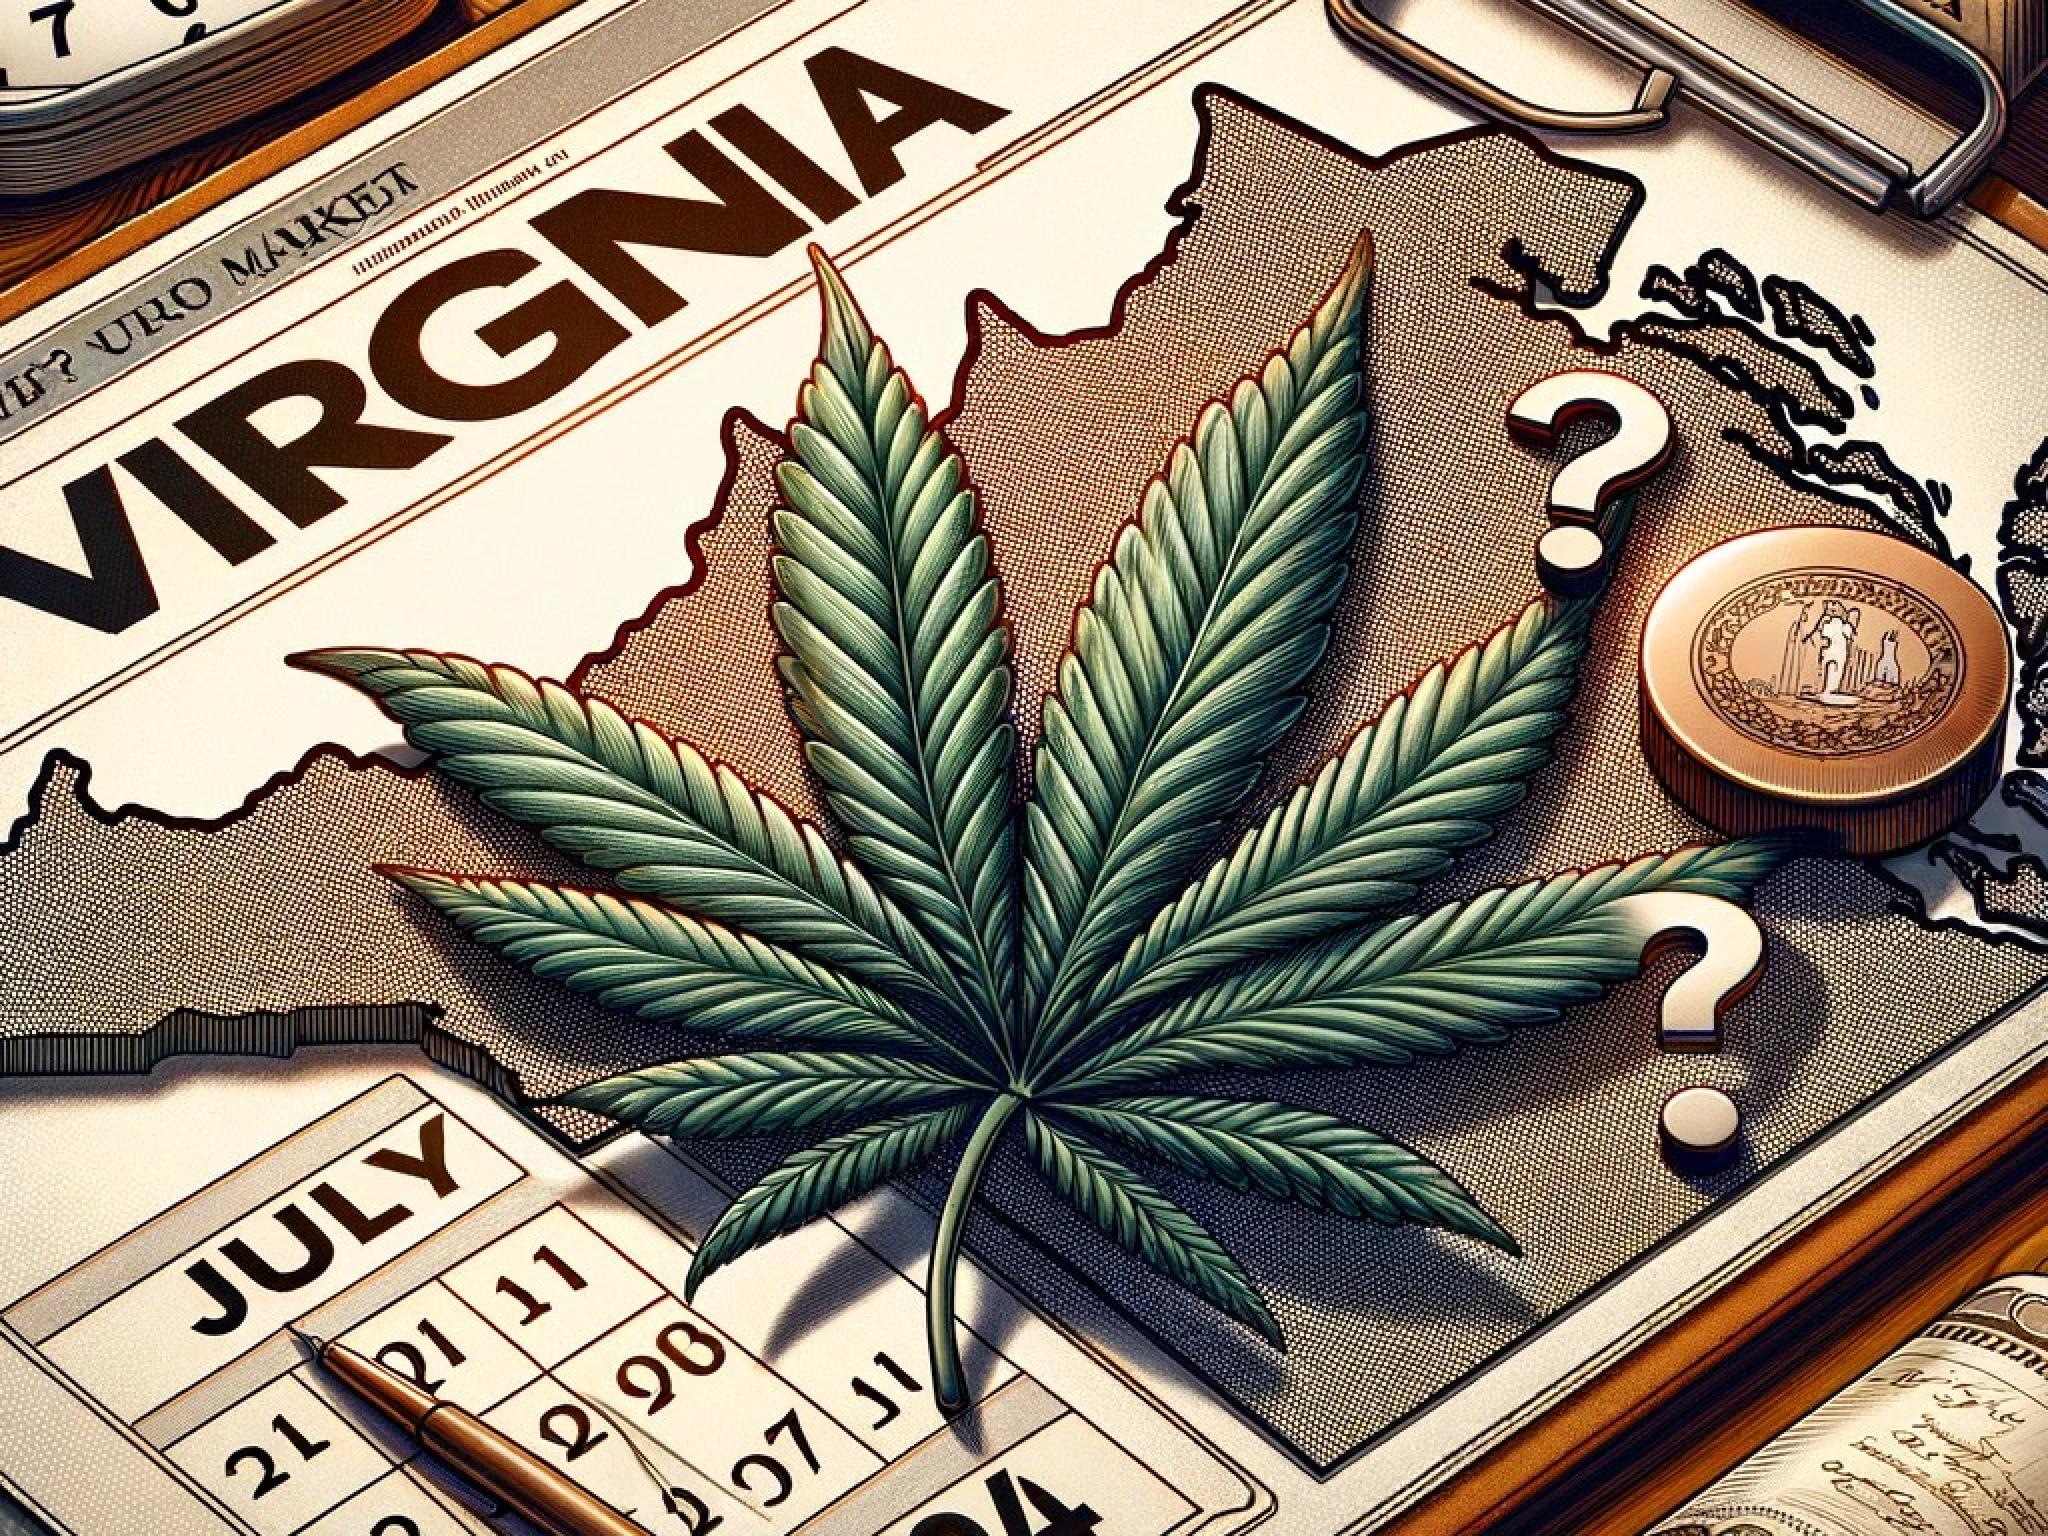  whos-leading-whats-happening--when-it-starts-analyst-unpacks-virginias-cannabis-market 